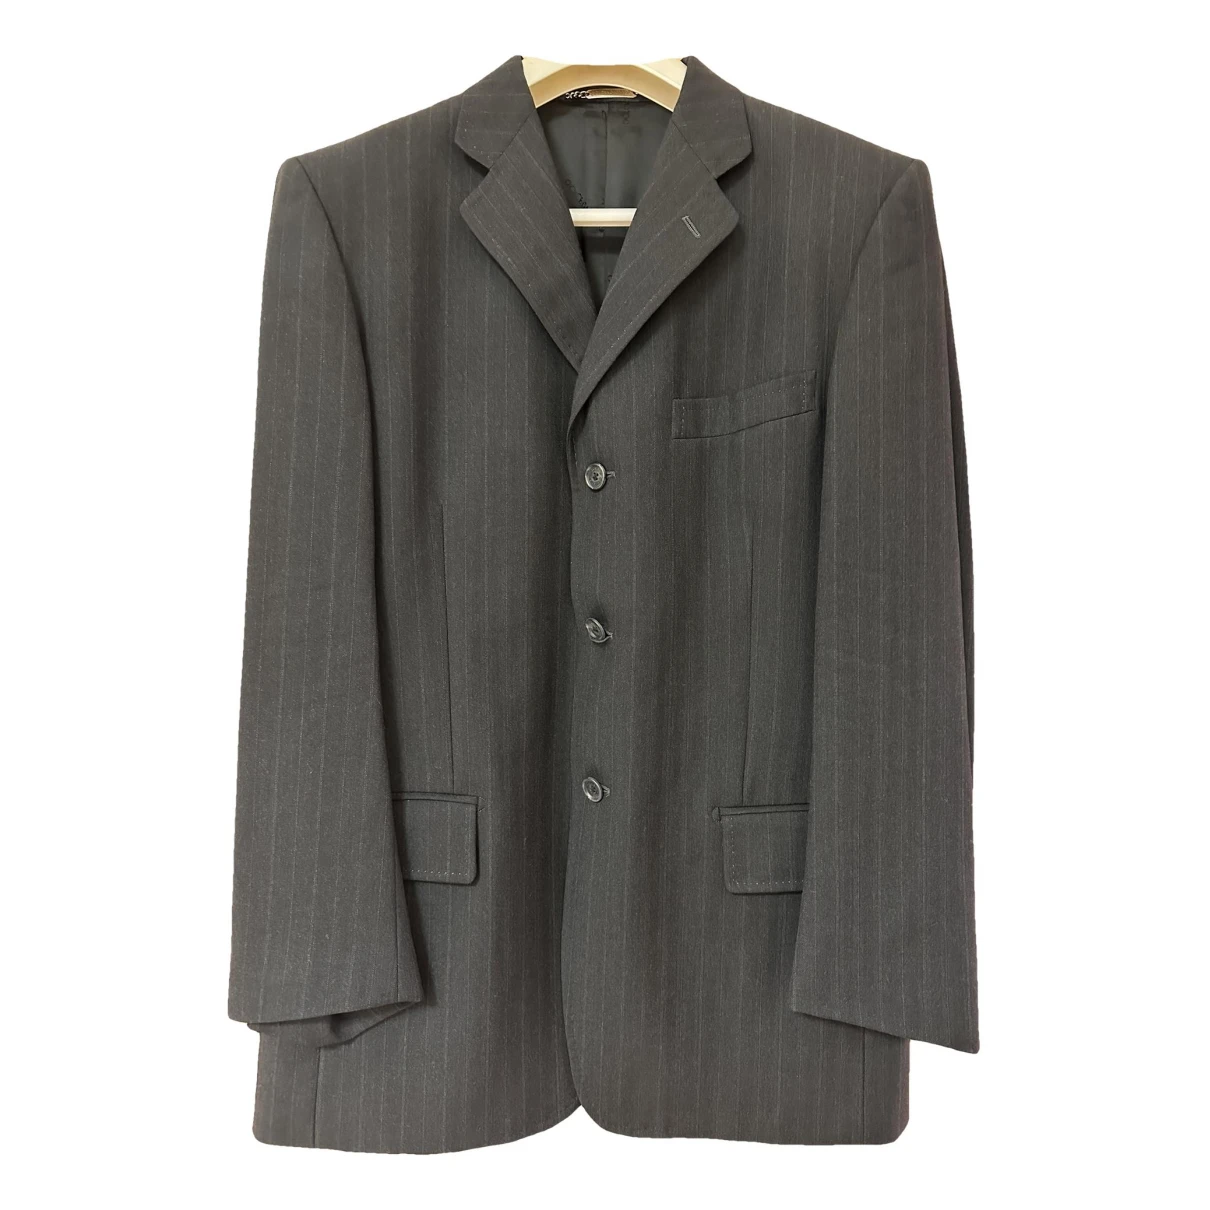 clothing Dolce & Gabbana suits for Male Wool 50 IT. Used condition